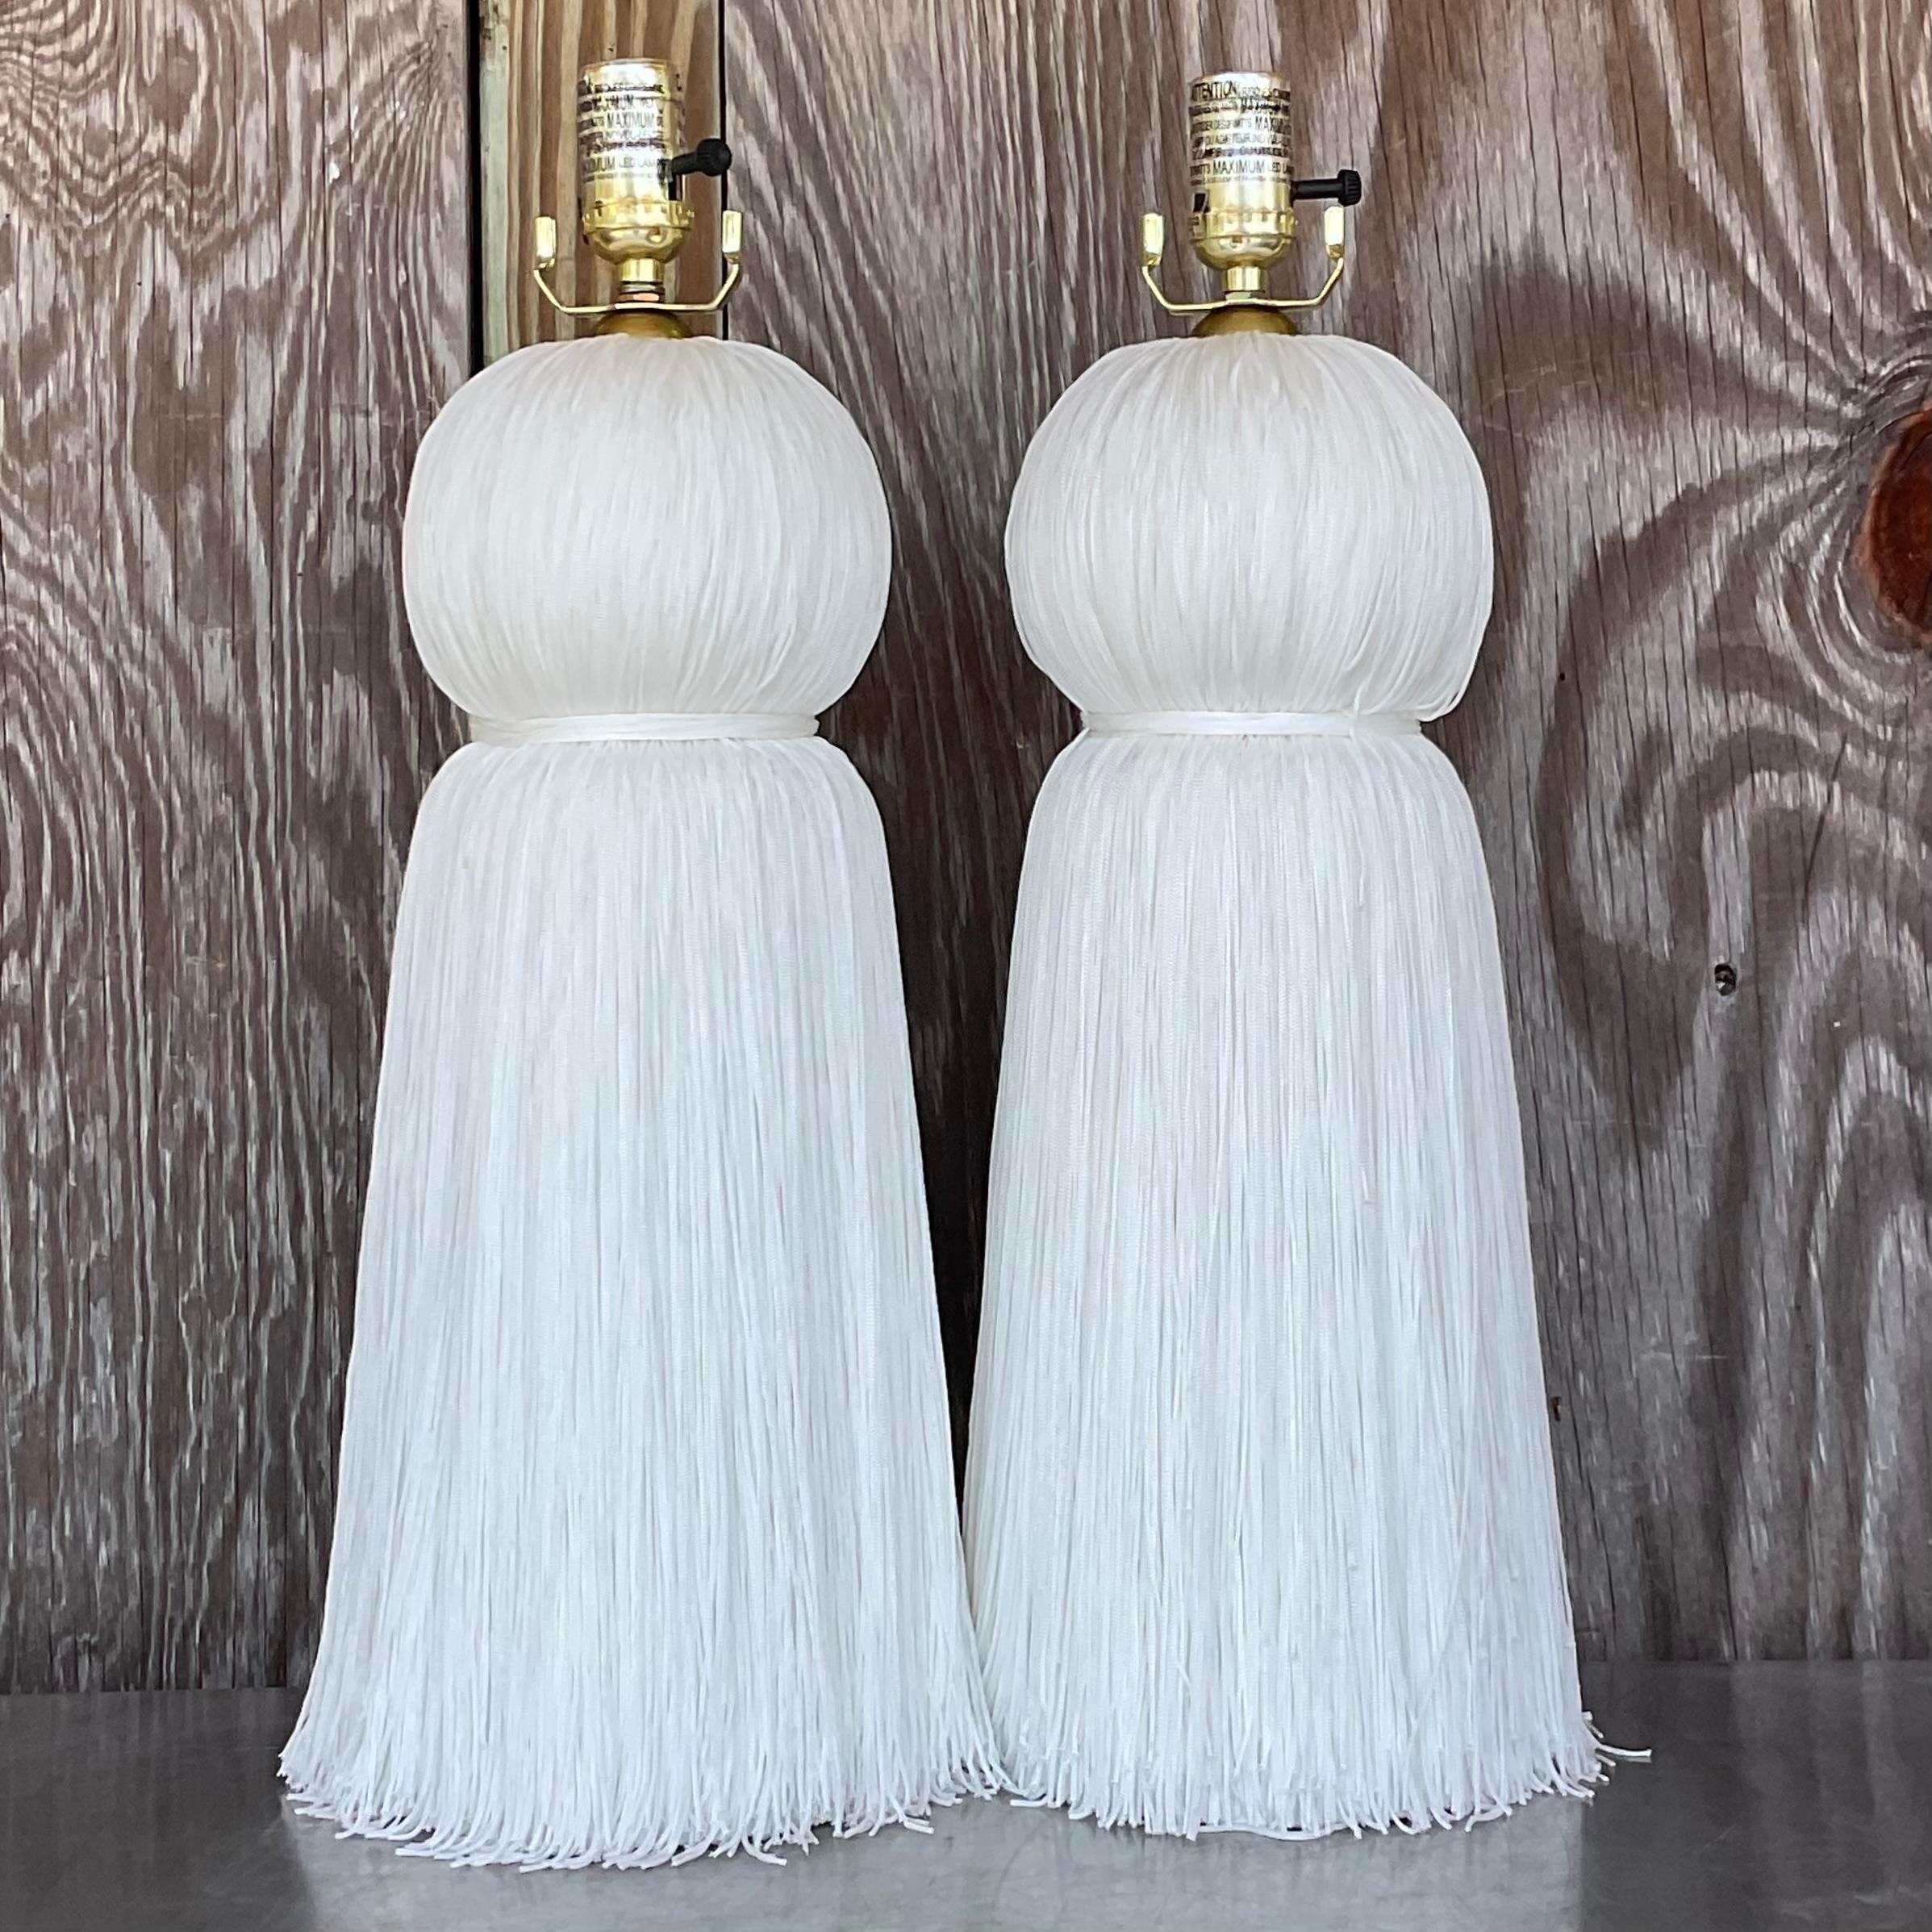 Vintage Regency Laura Kirar for Arteriors Tassle Lamps - a Pair In Good Condition For Sale In west palm beach, FL